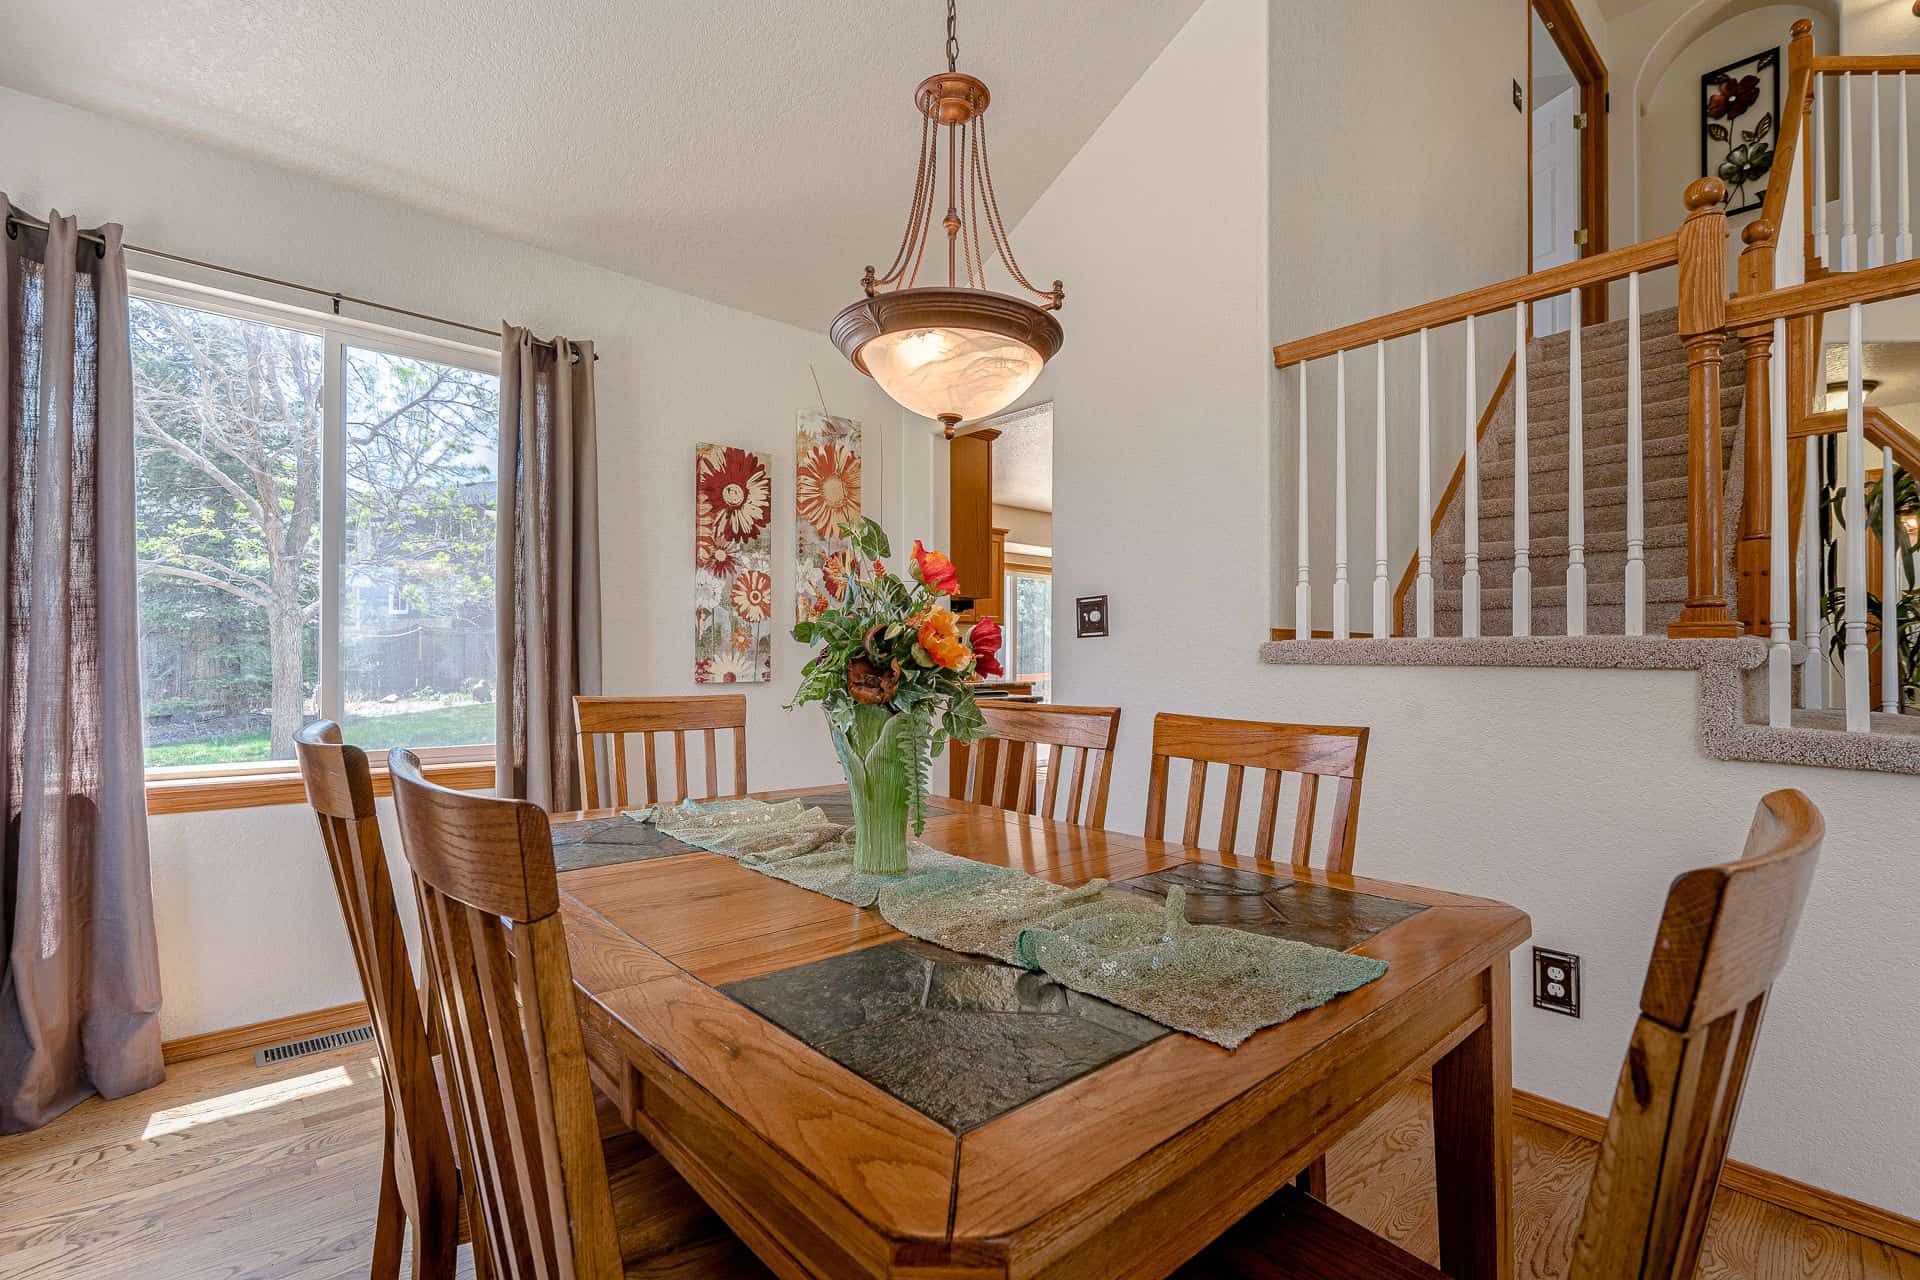 8 – Formal Dining Room into Kitchen